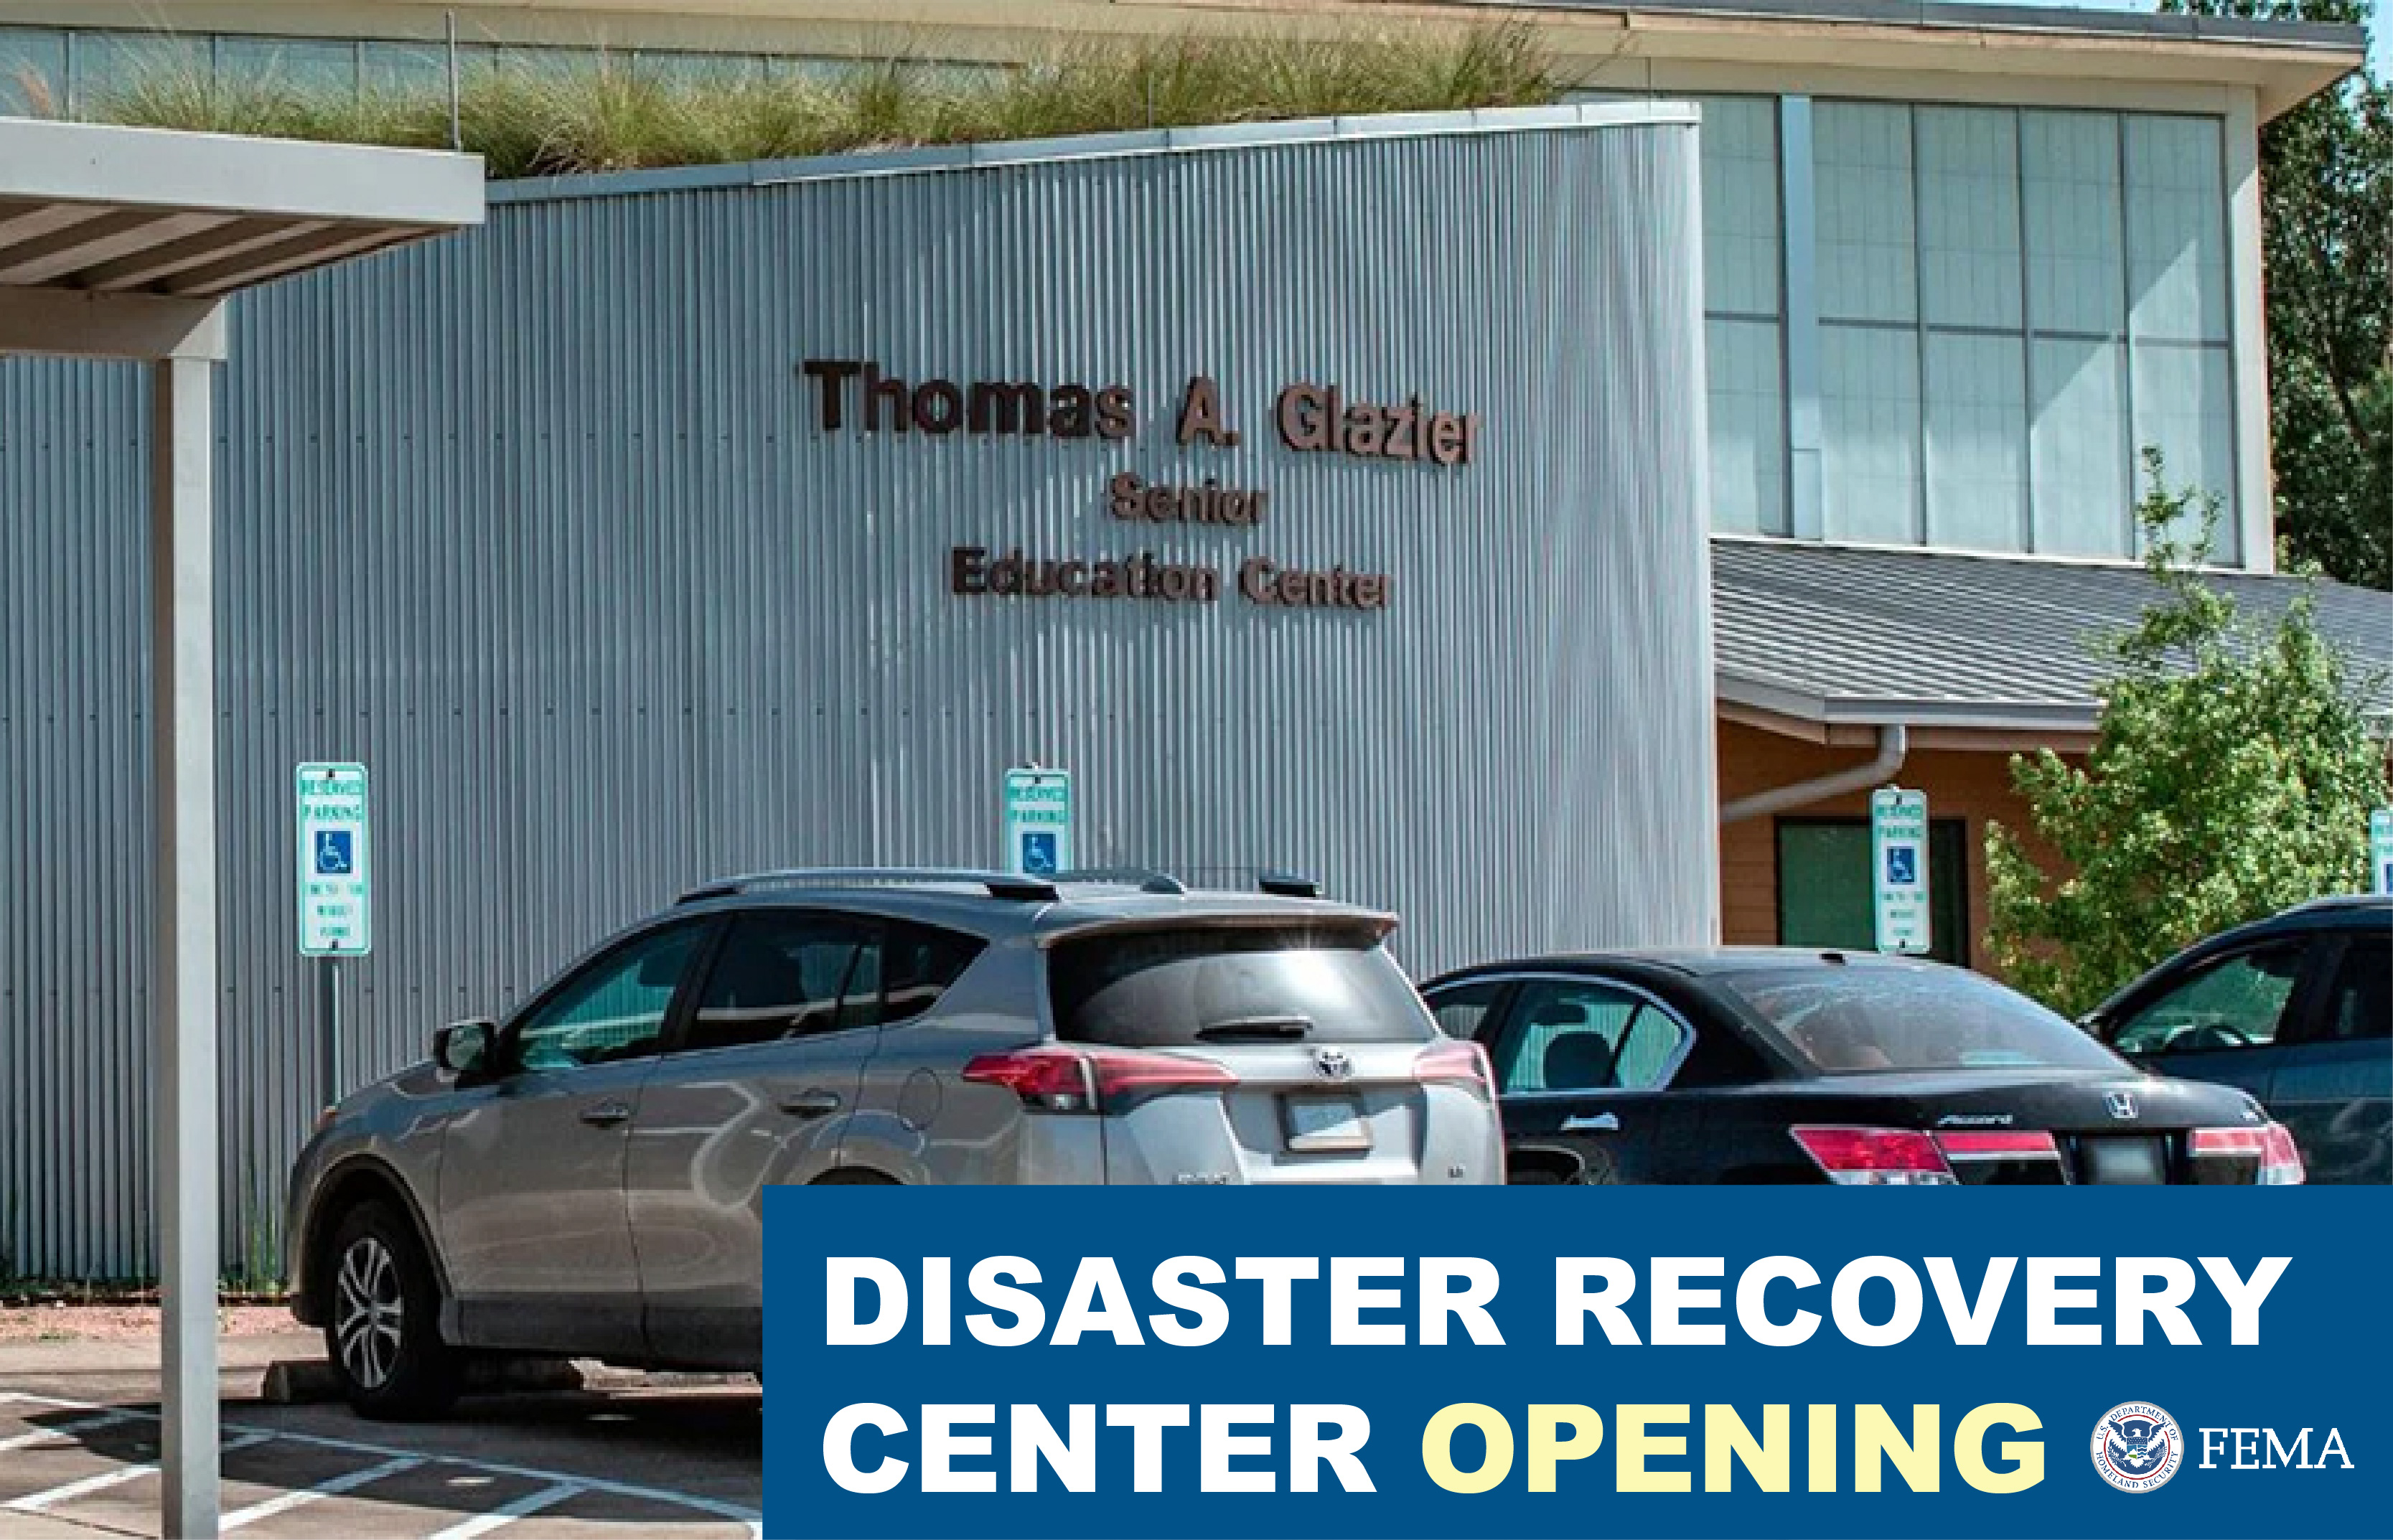  FEMA Opens Disaster Recovery Center in Harris County for Residents Affected by Severe Storms and Flooding